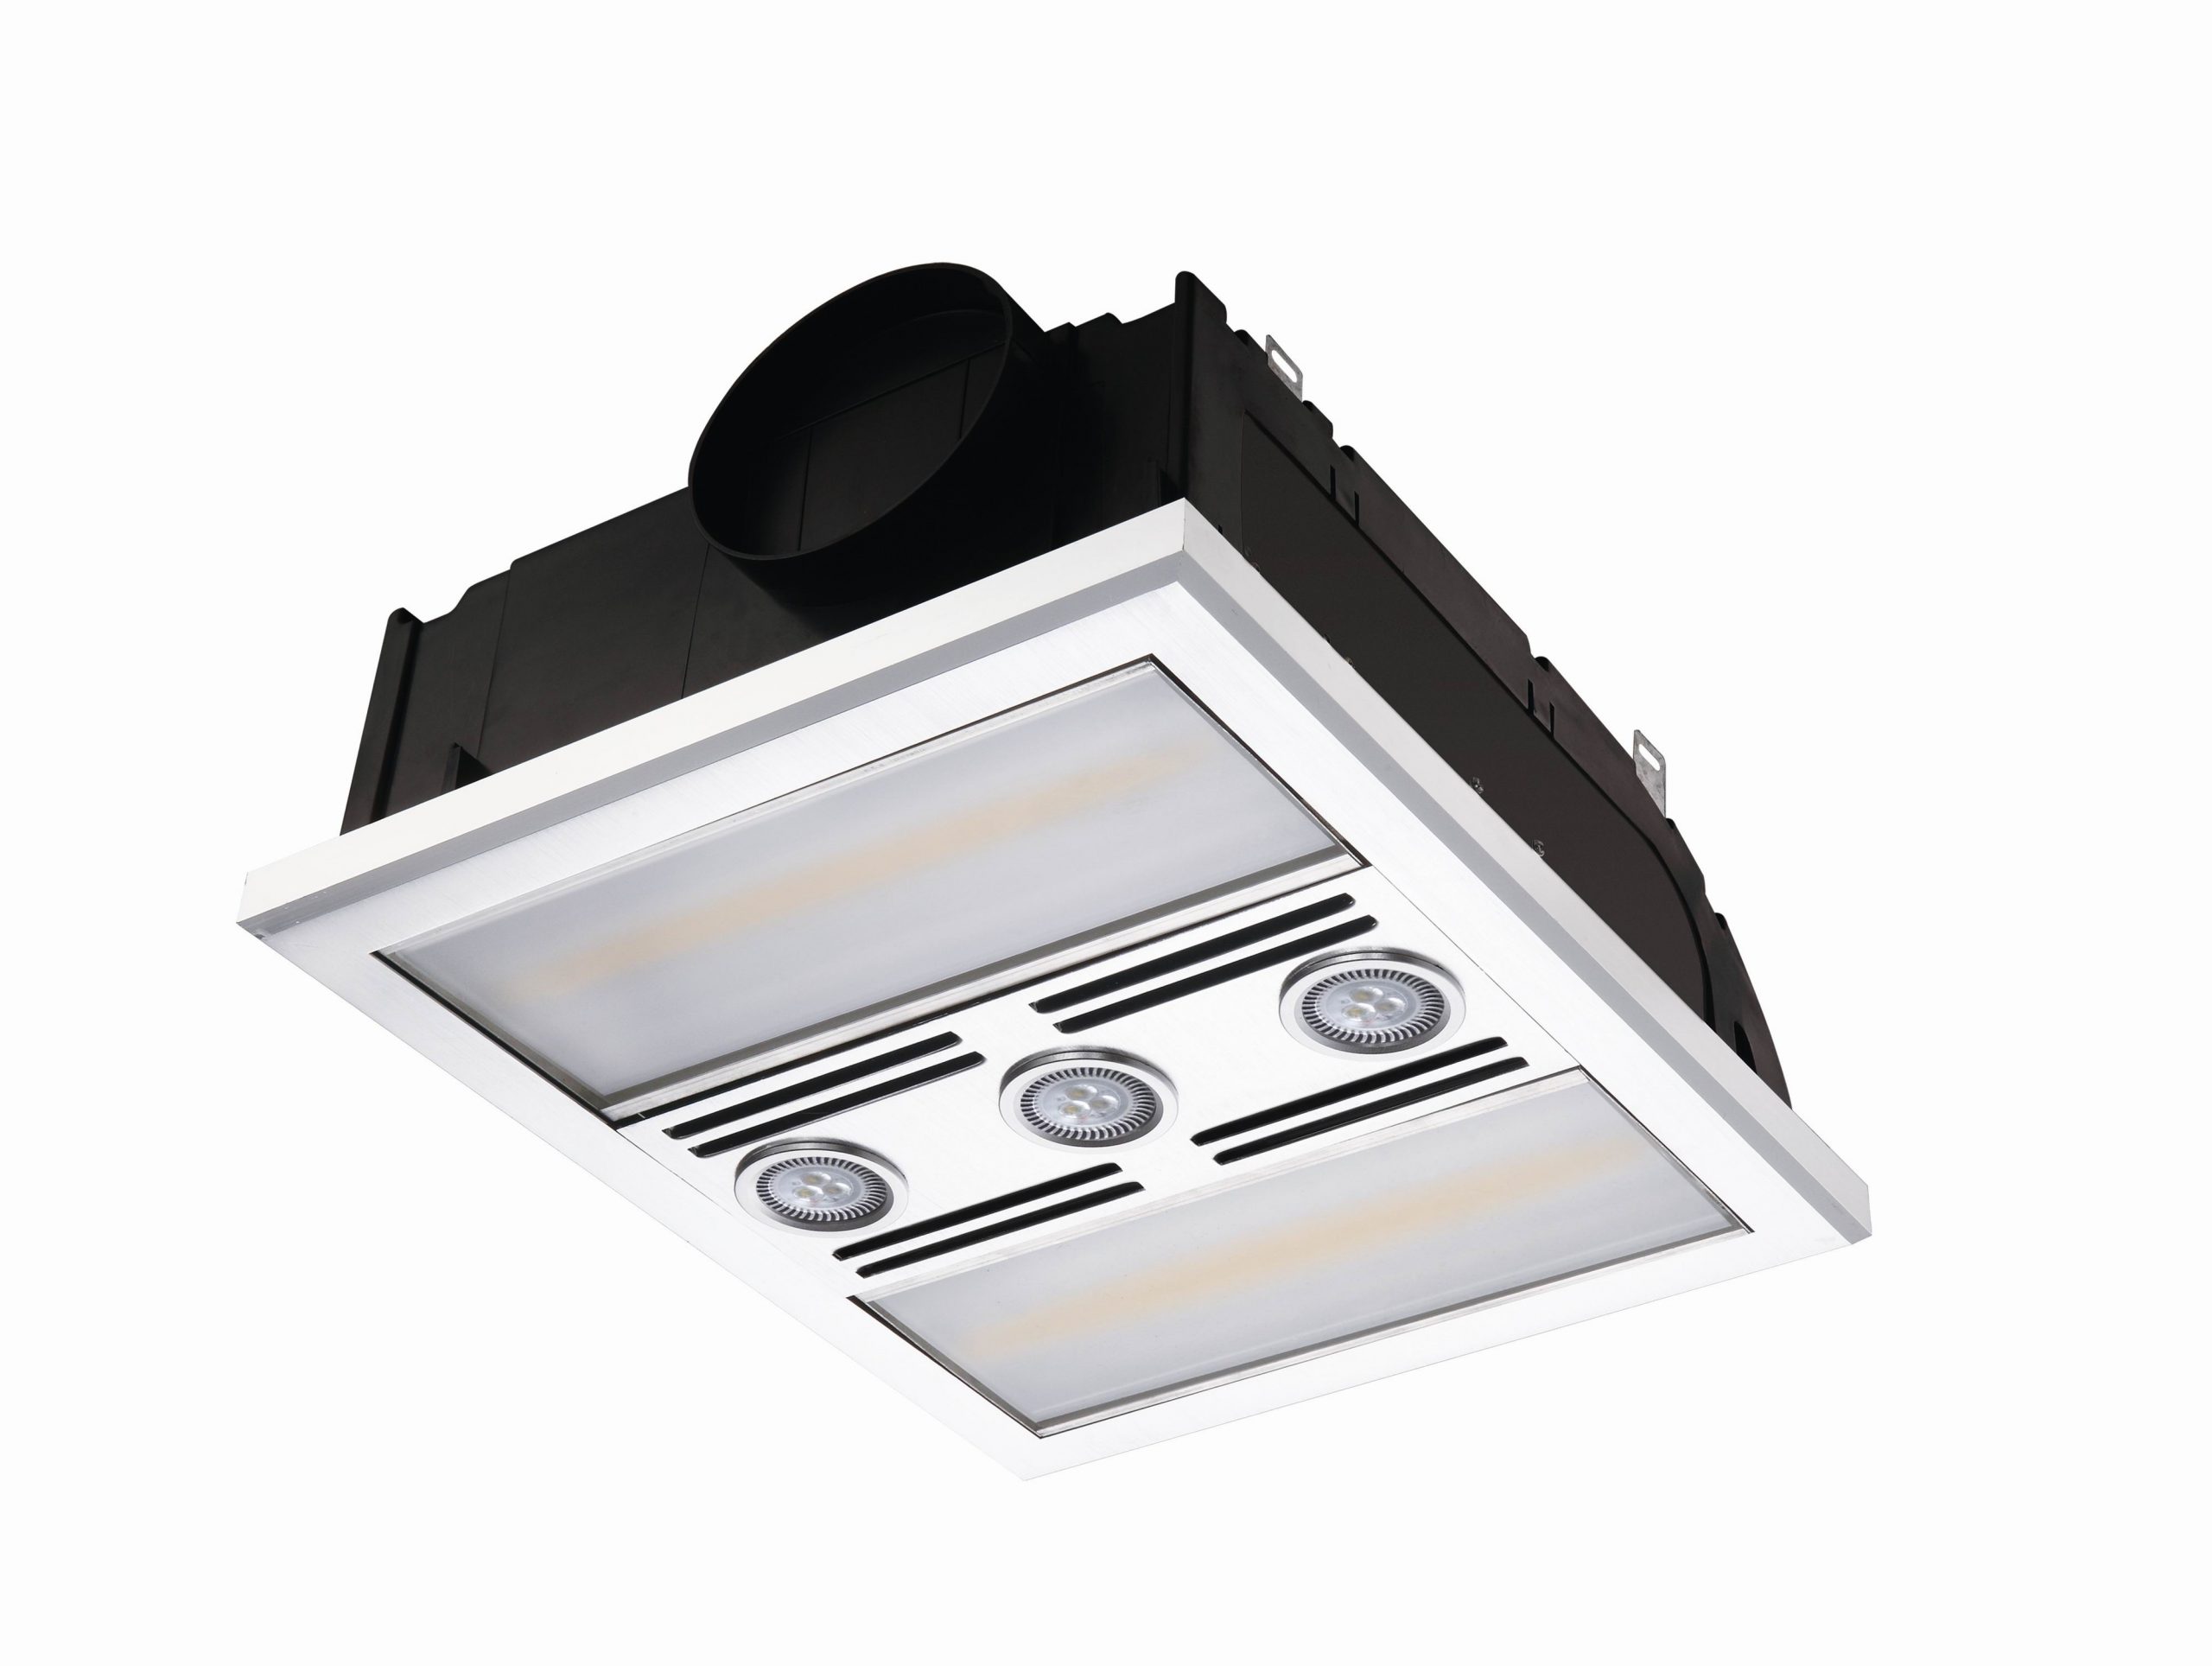 Incredible Bathroom Exhaust Fan With Light And Heater for proportions 4000 X 3012